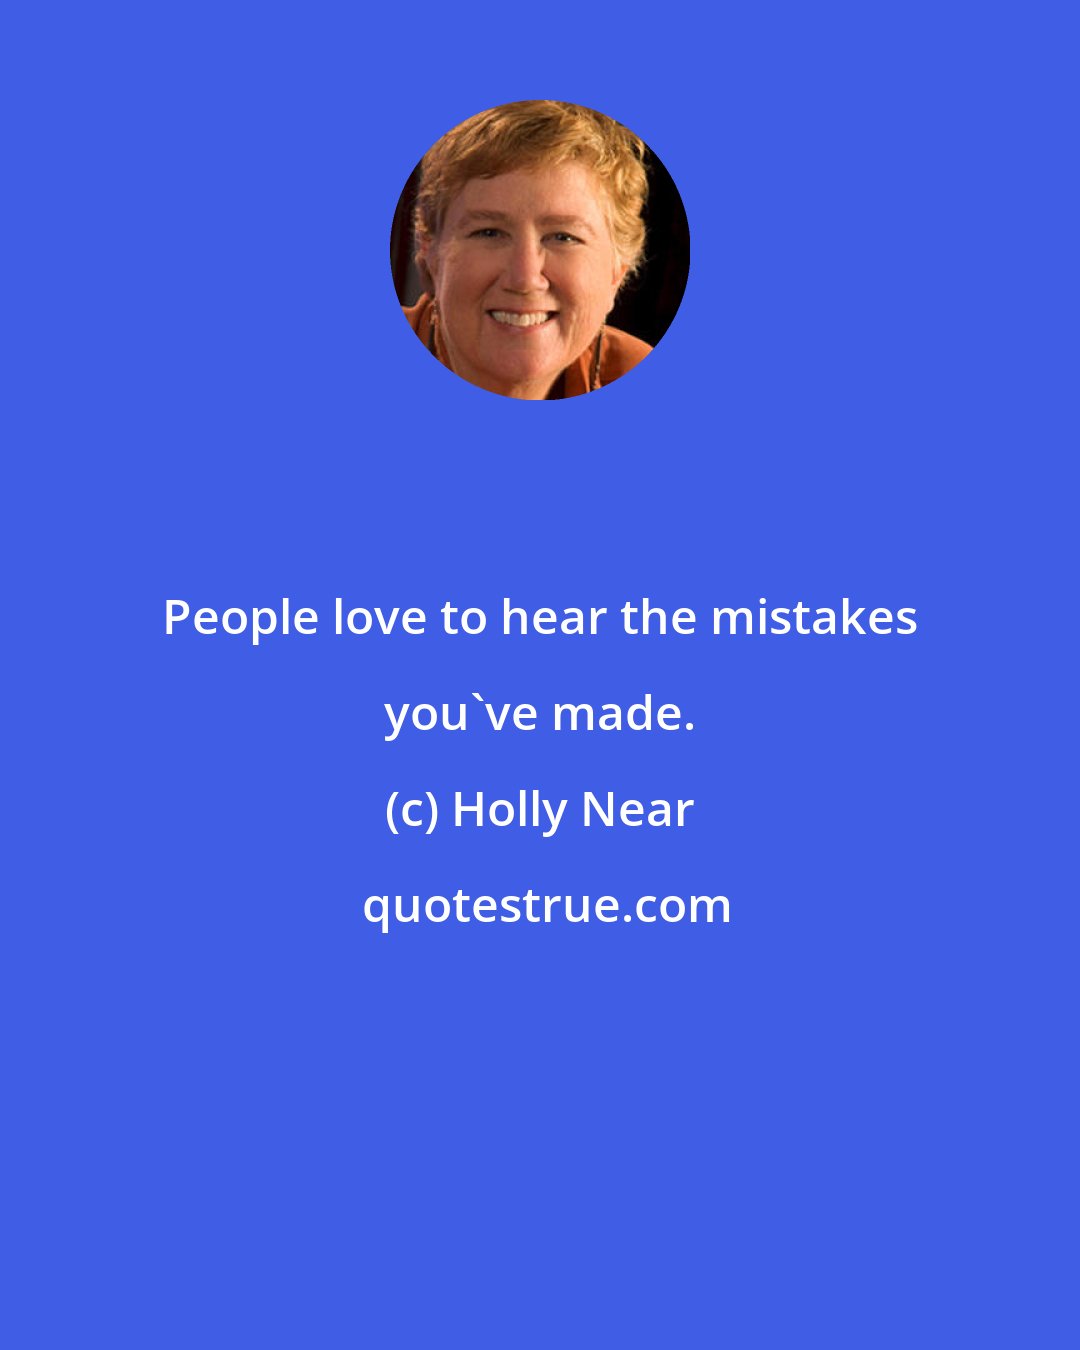 Holly Near: People love to hear the mistakes you've made.